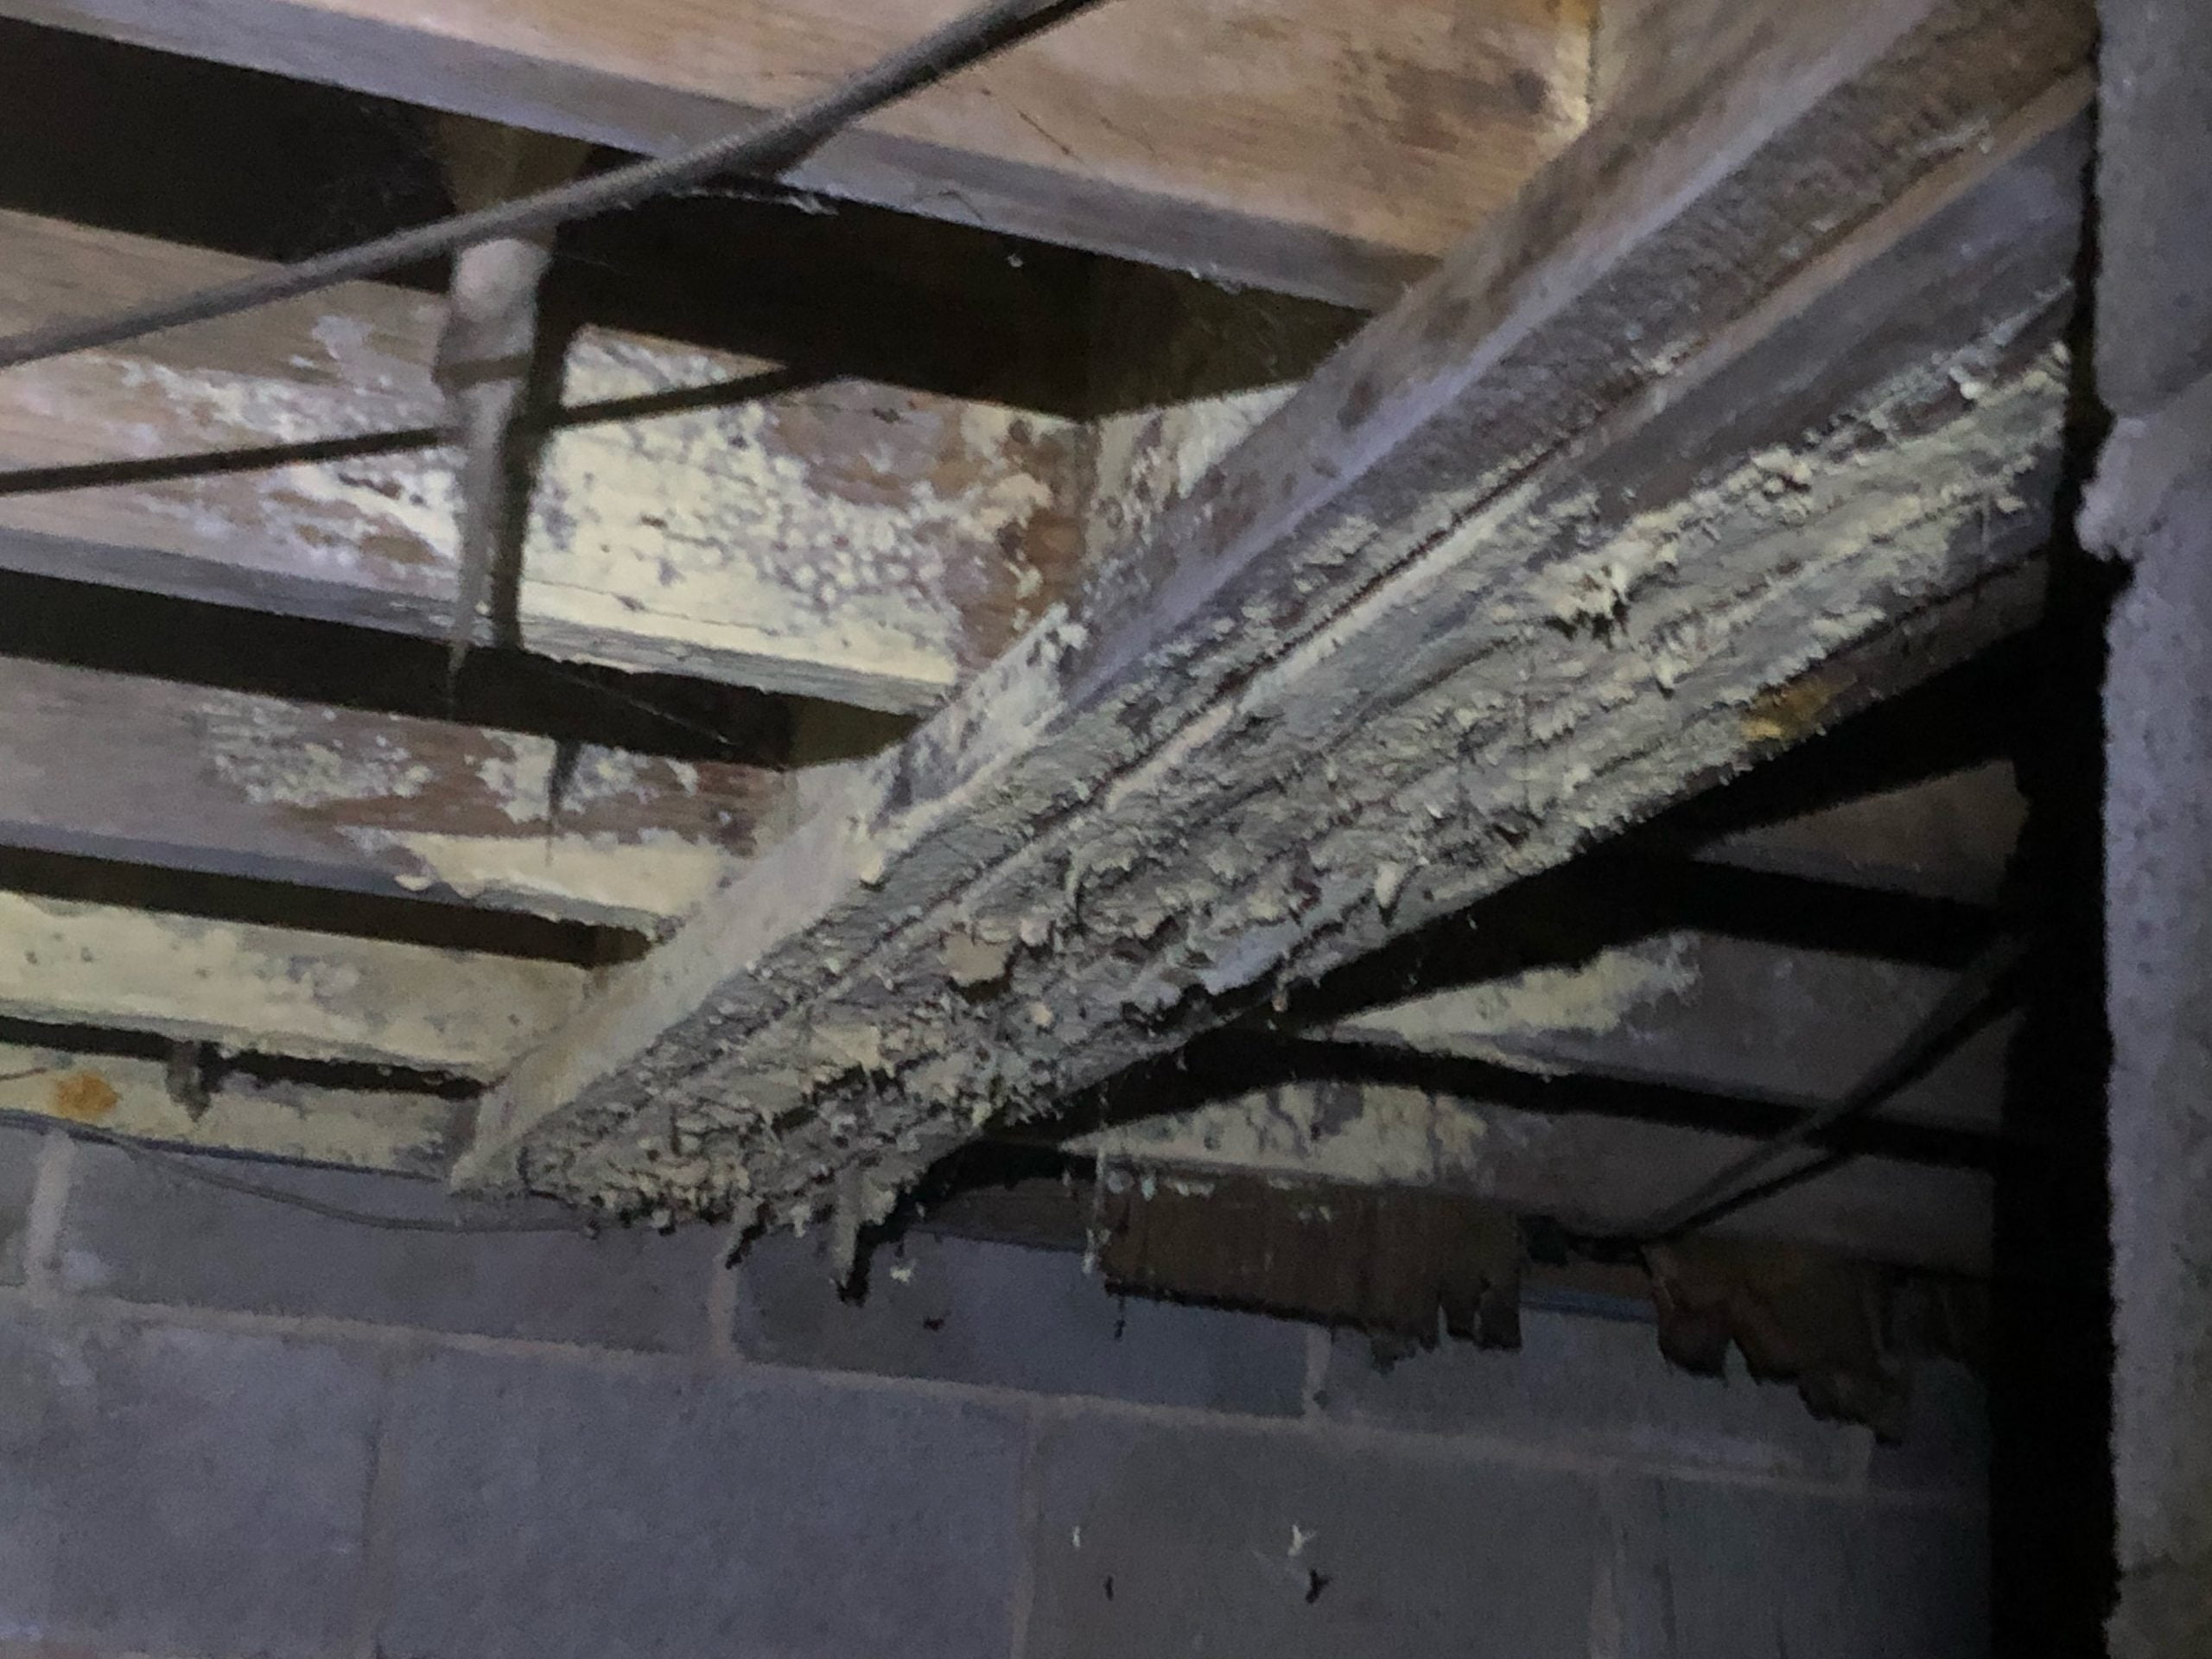 A mold covering support beams inside a crawl space.